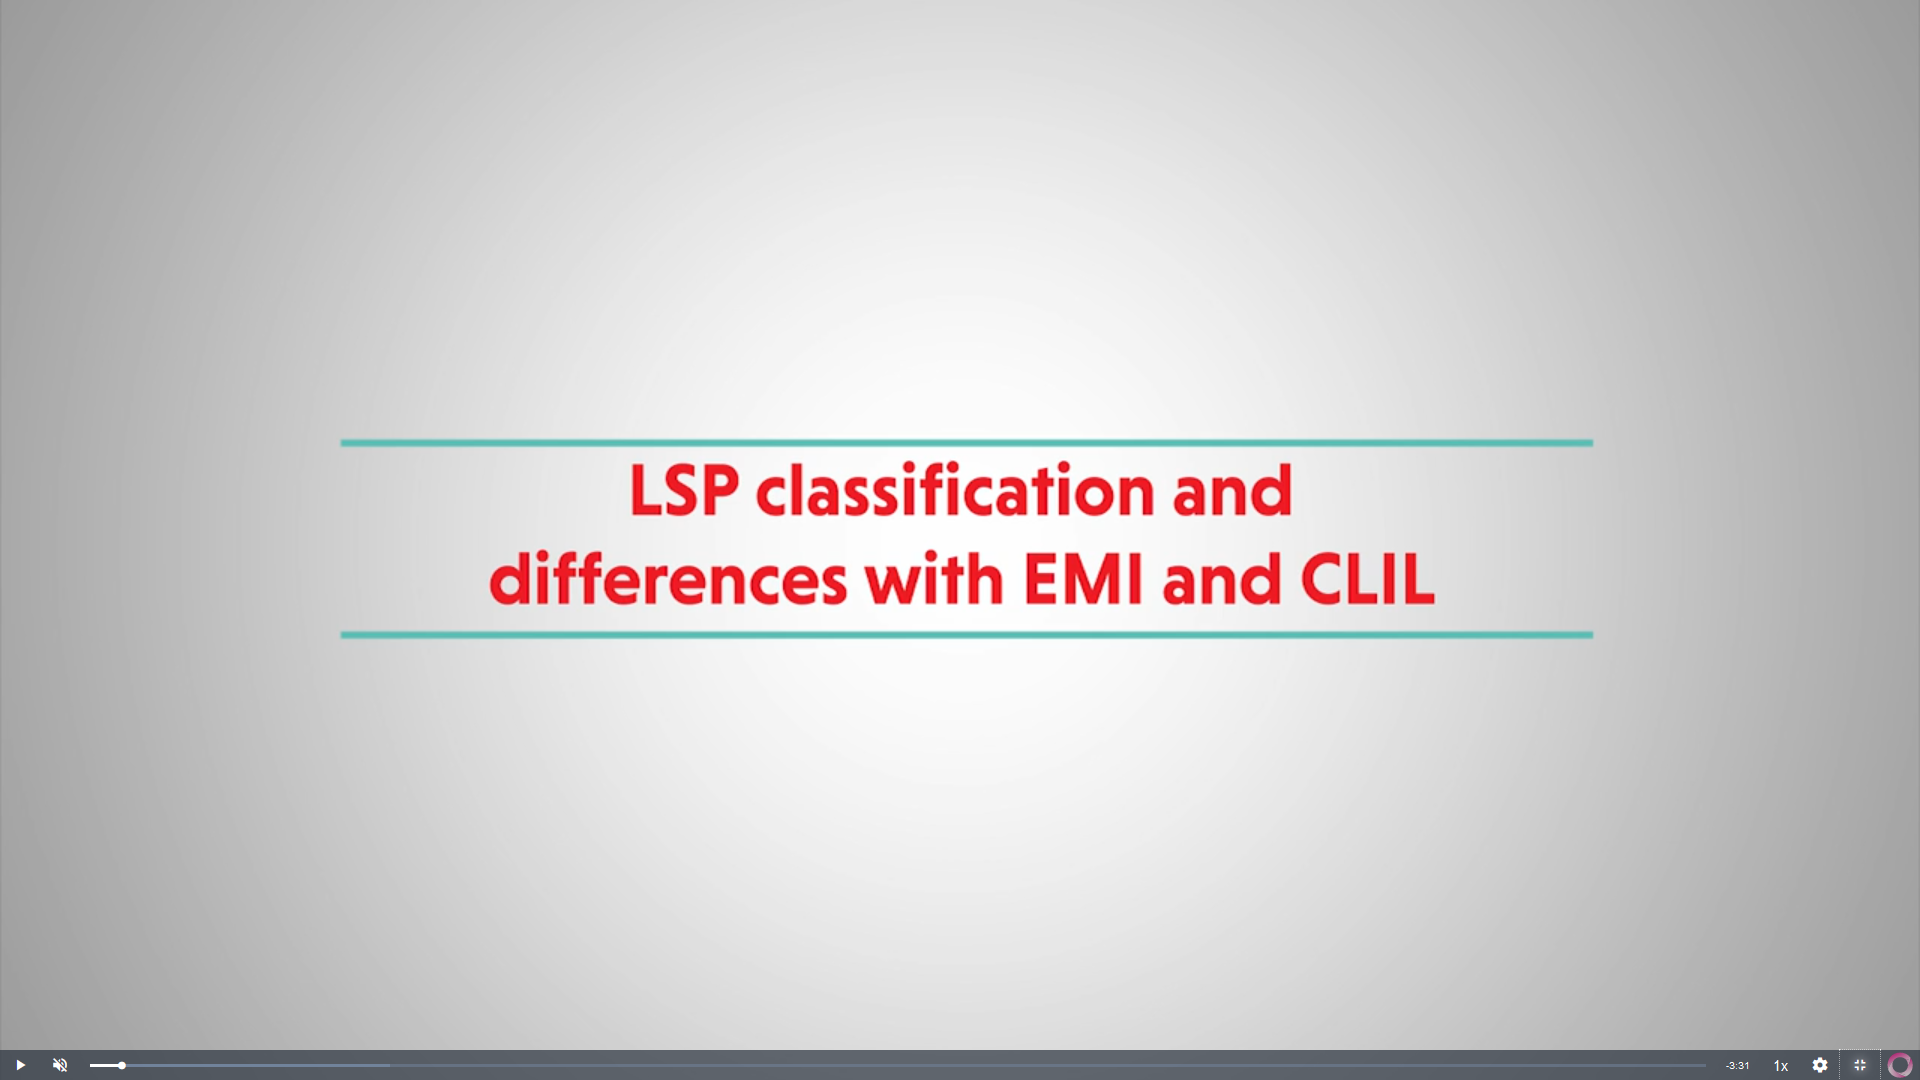 LSP classification and differences with EMI and CLIL